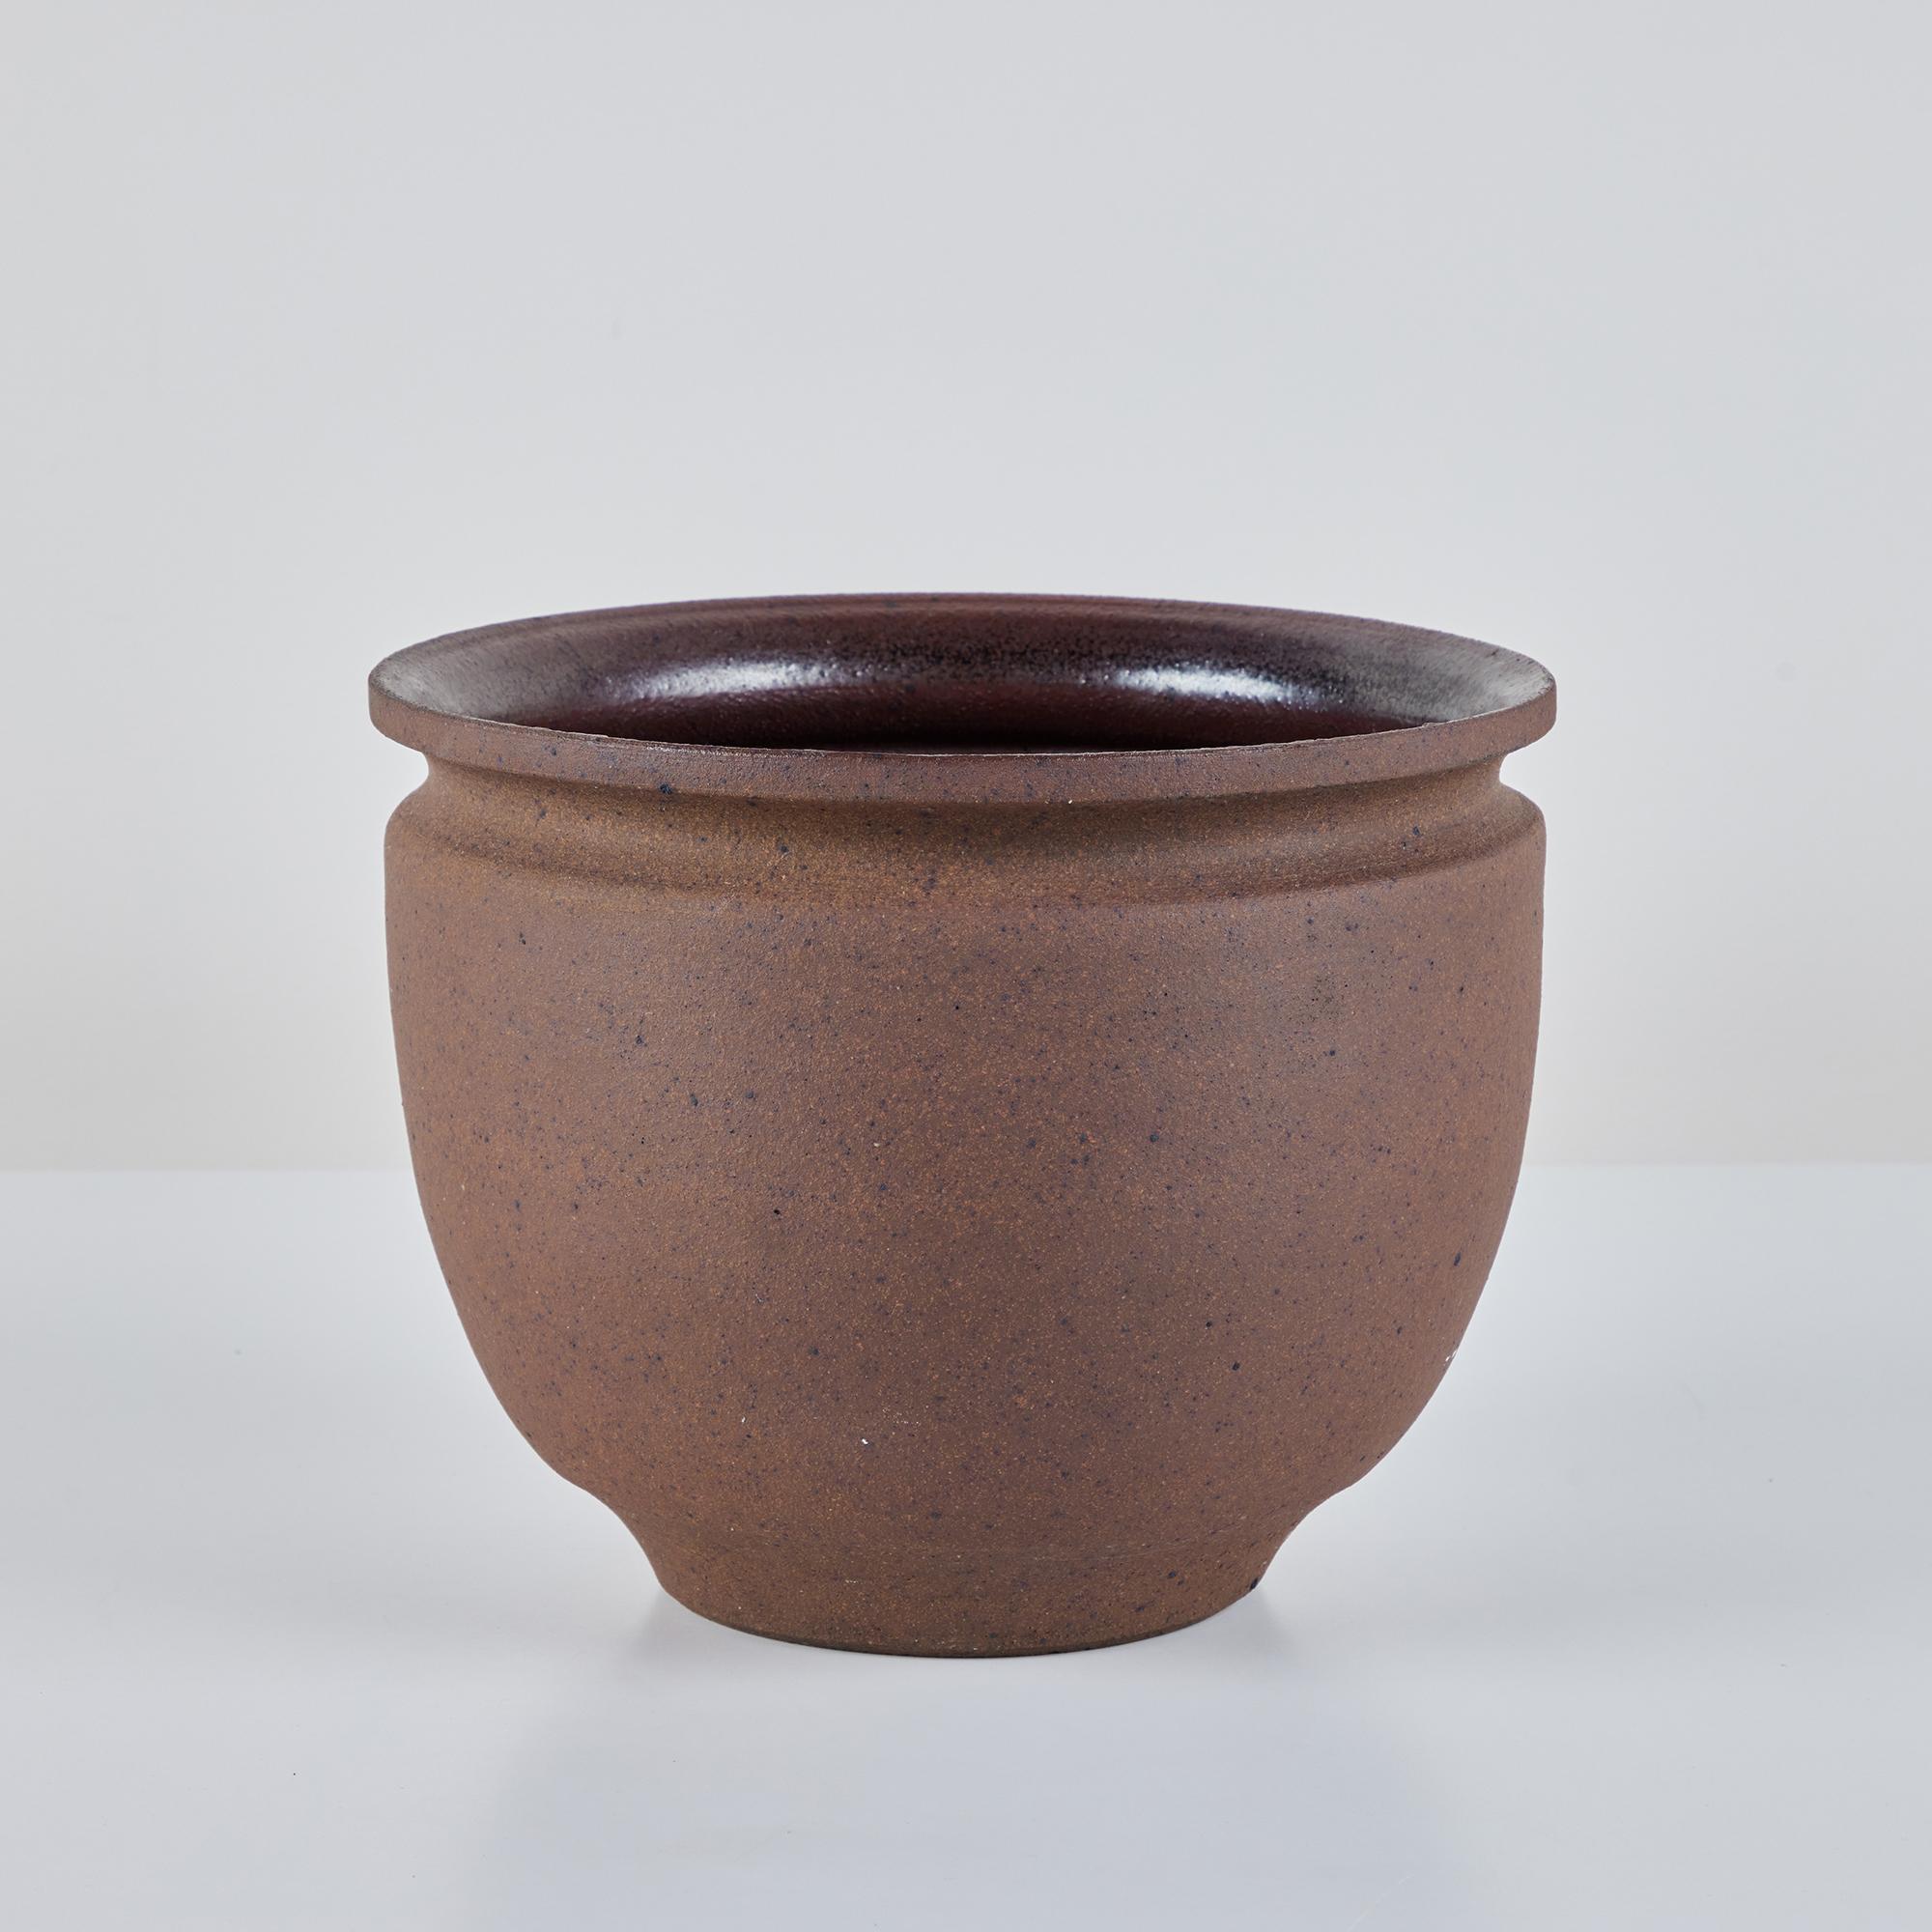 A hand thrown stoneware bowl planter from California ceramicist Robert Maxwell. The planter has a rounded lip and speckled stoneware exterior. The interior is glazed in a warm brown speckle.

Dimensions
11” diameter x 8.75”